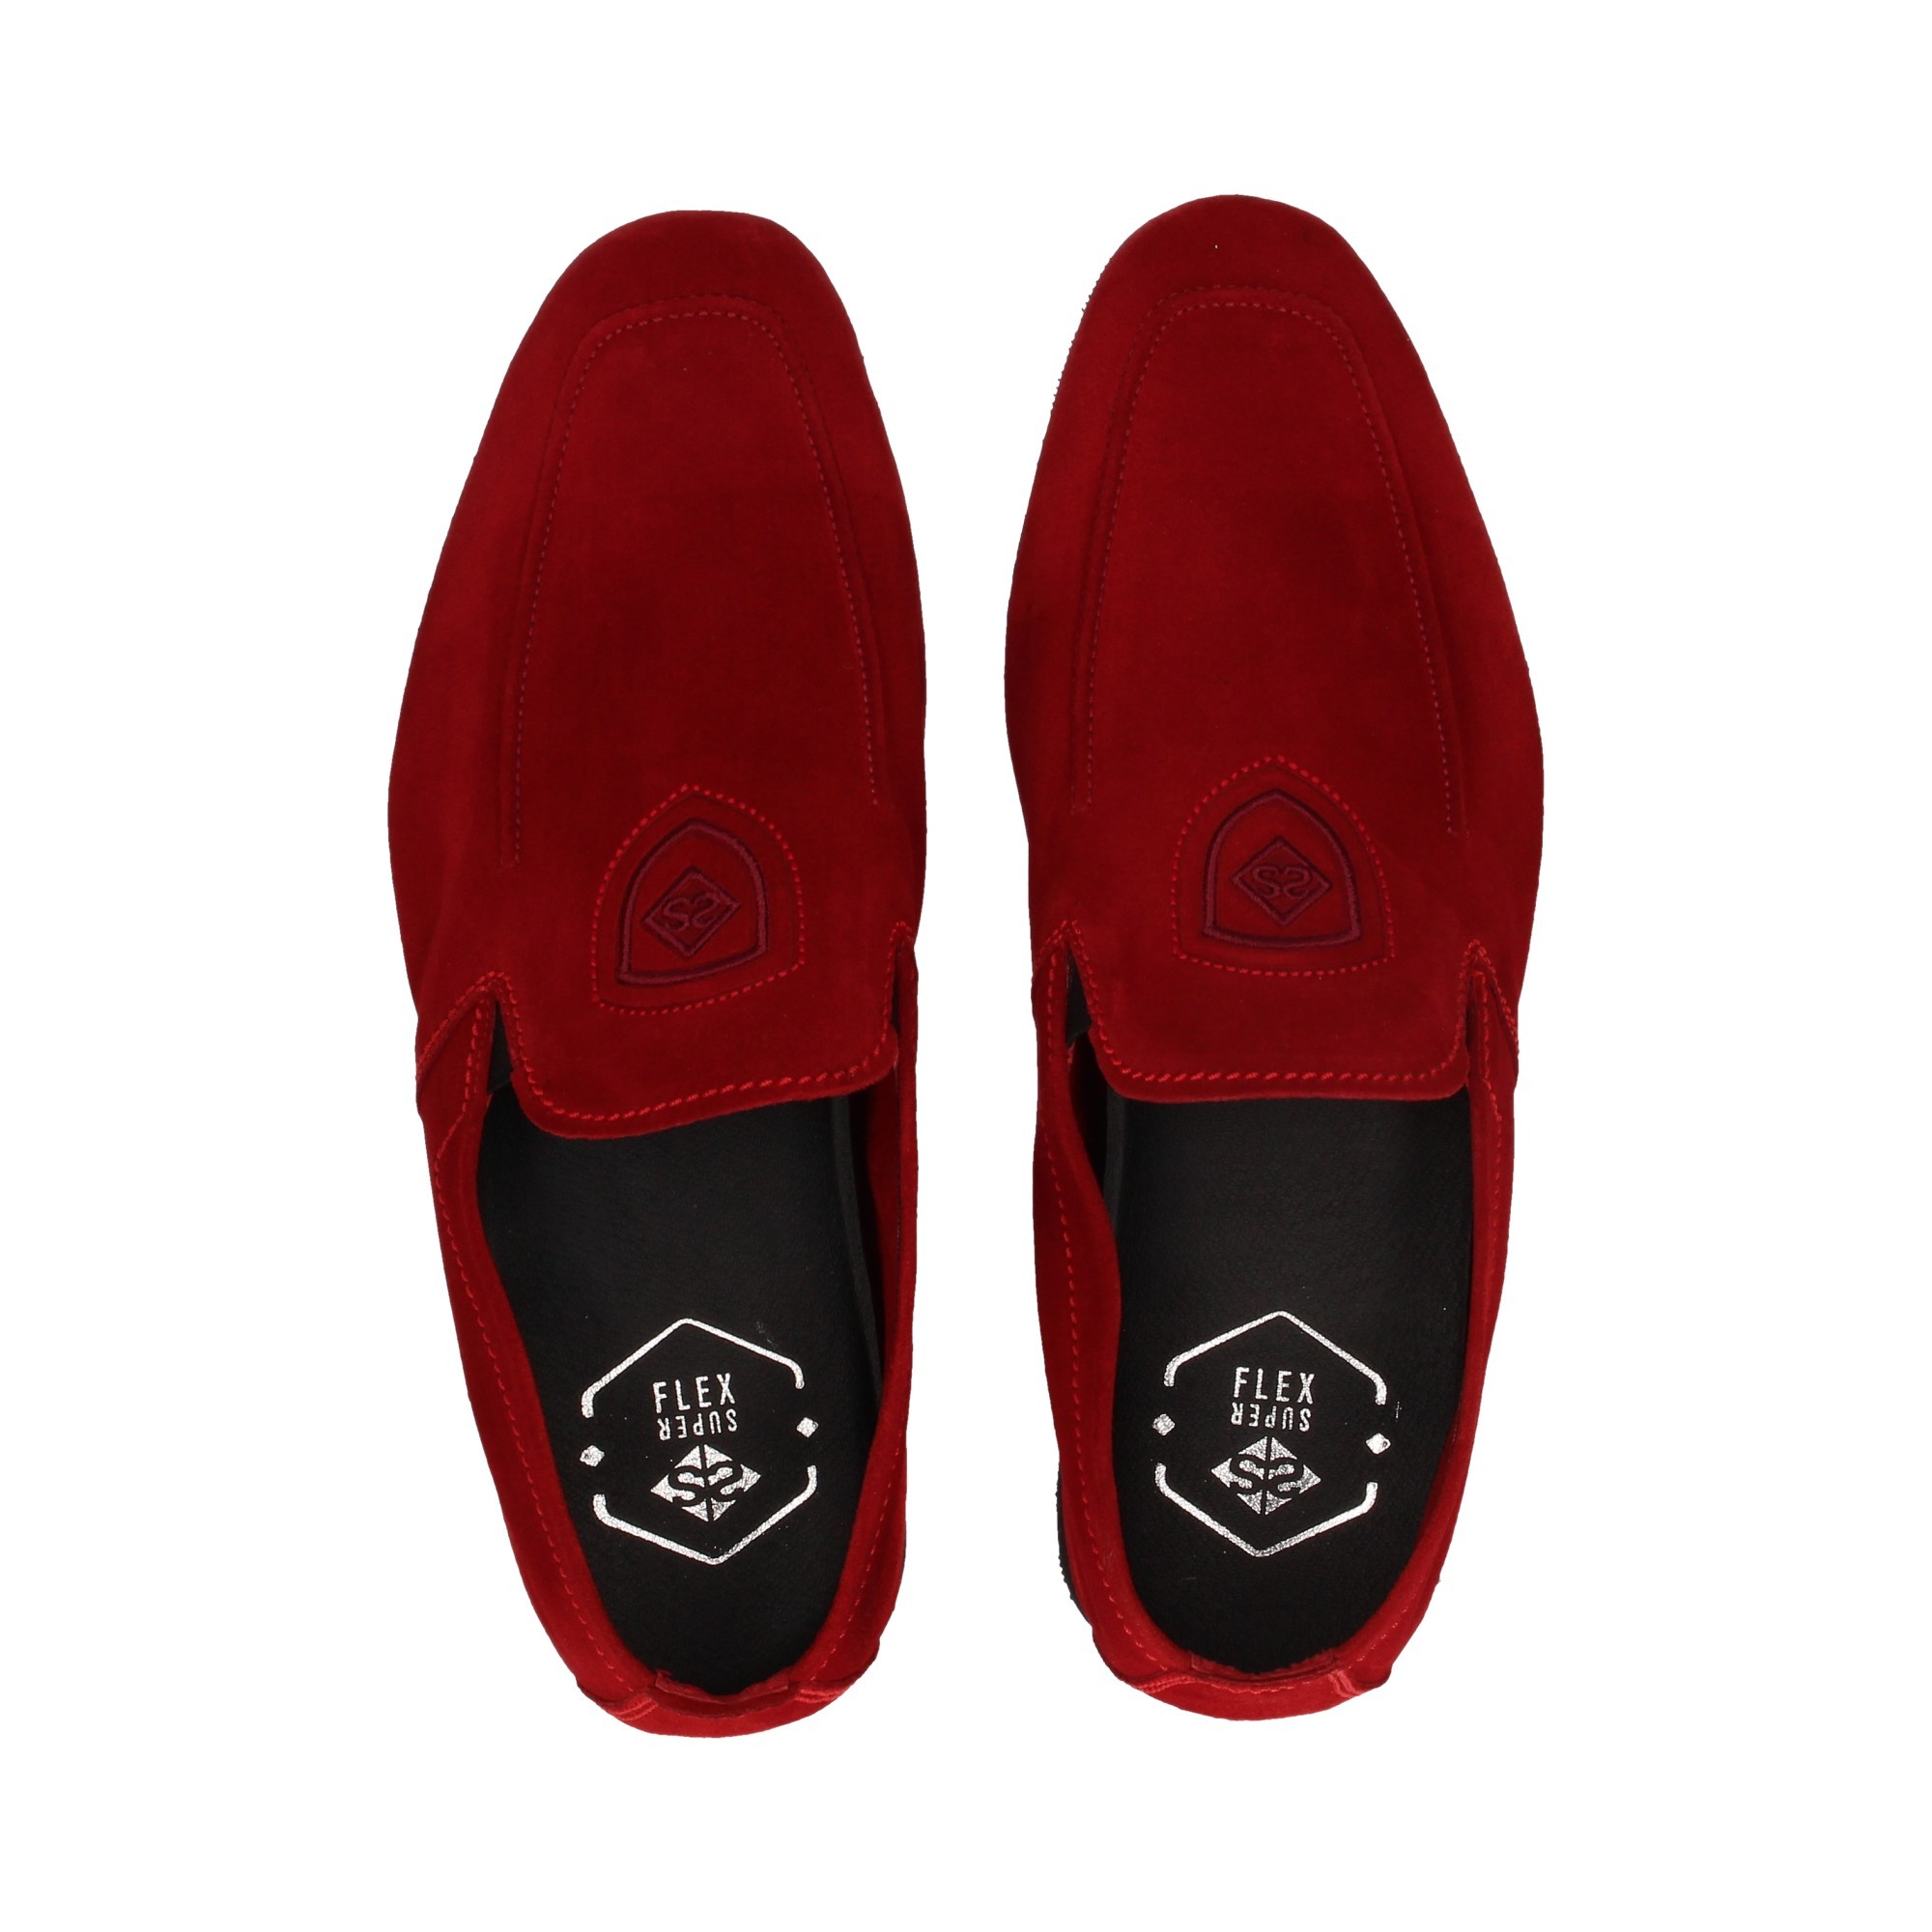 moccasin-shield-red-suede